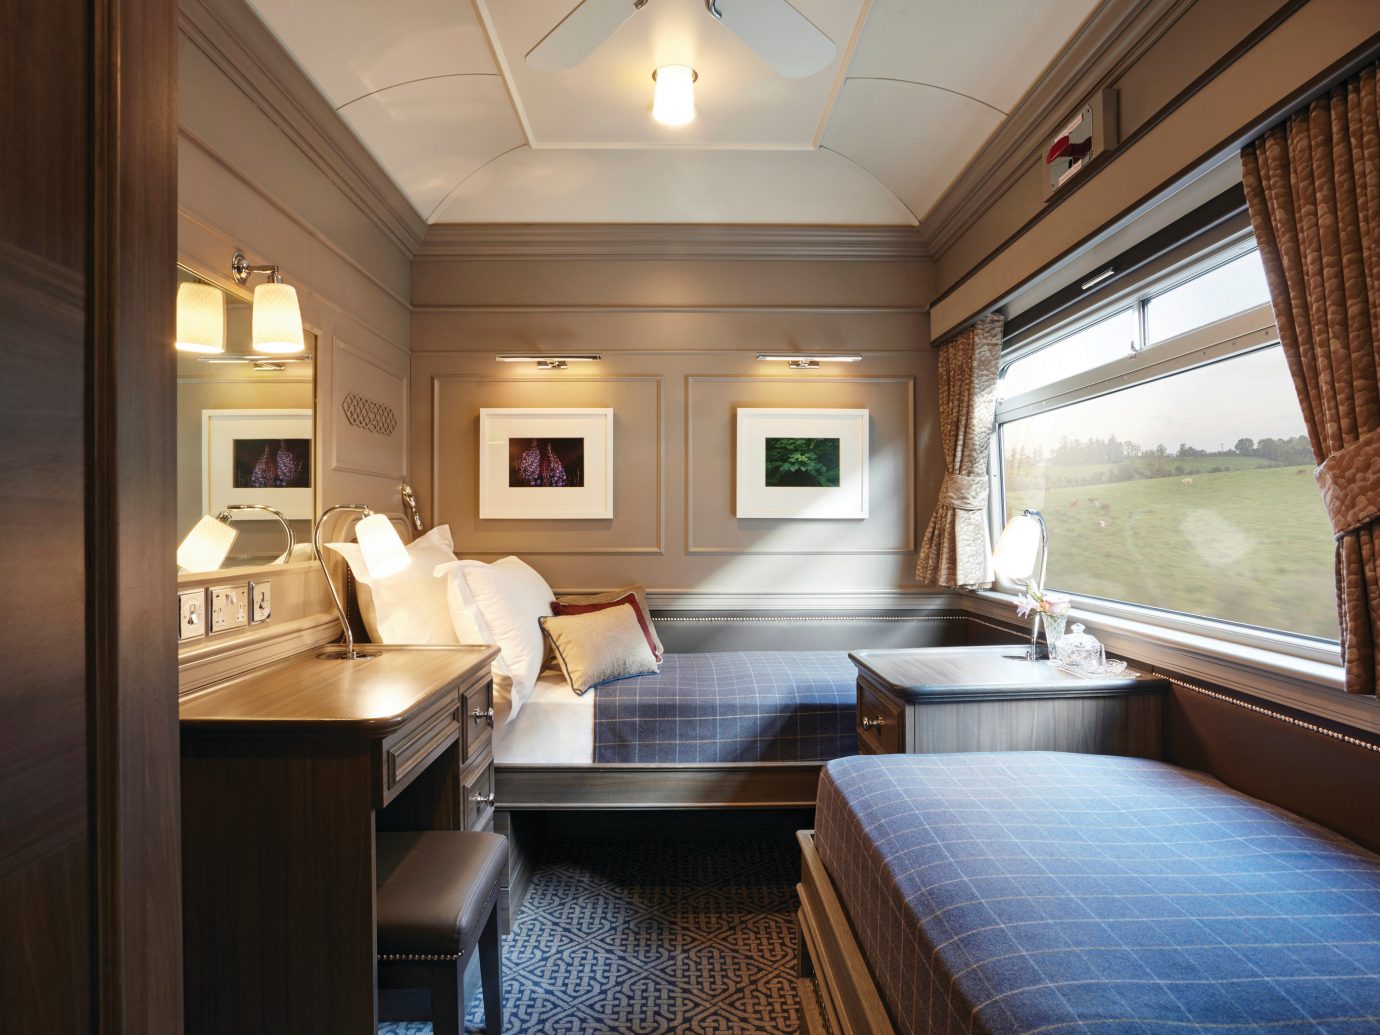 One of the Most Coveted Luxury Trains in Europe Just Revealed New Suites —  See Inside